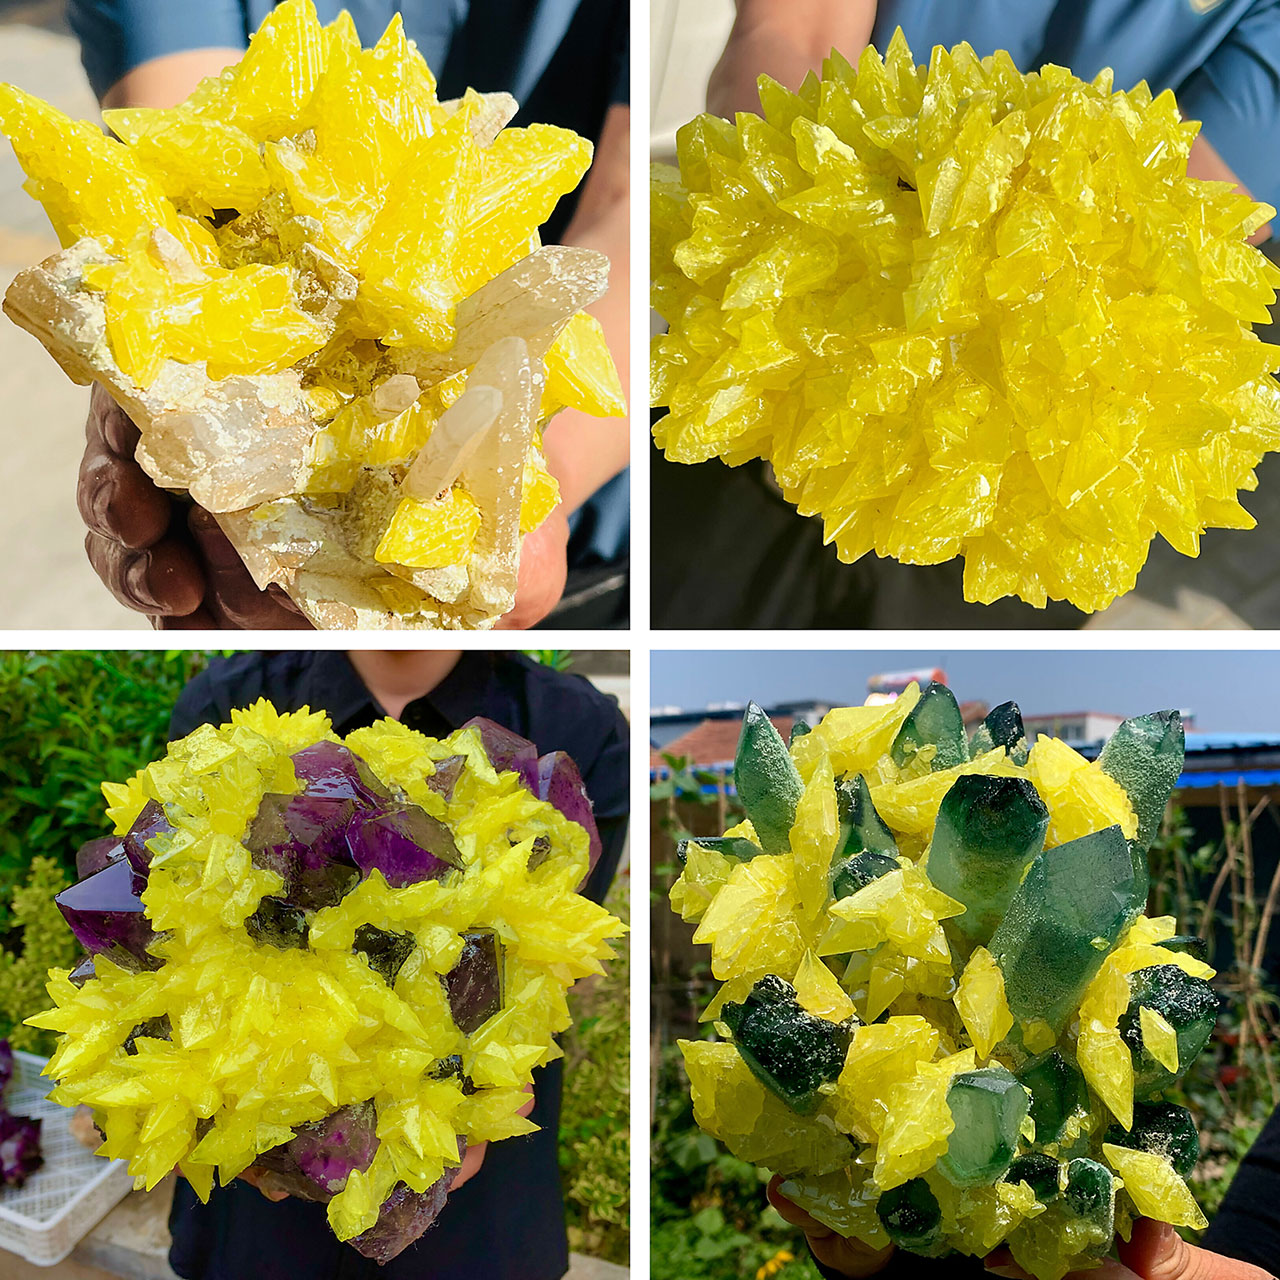 Selection of fake synthetic sulphur crystal clusters